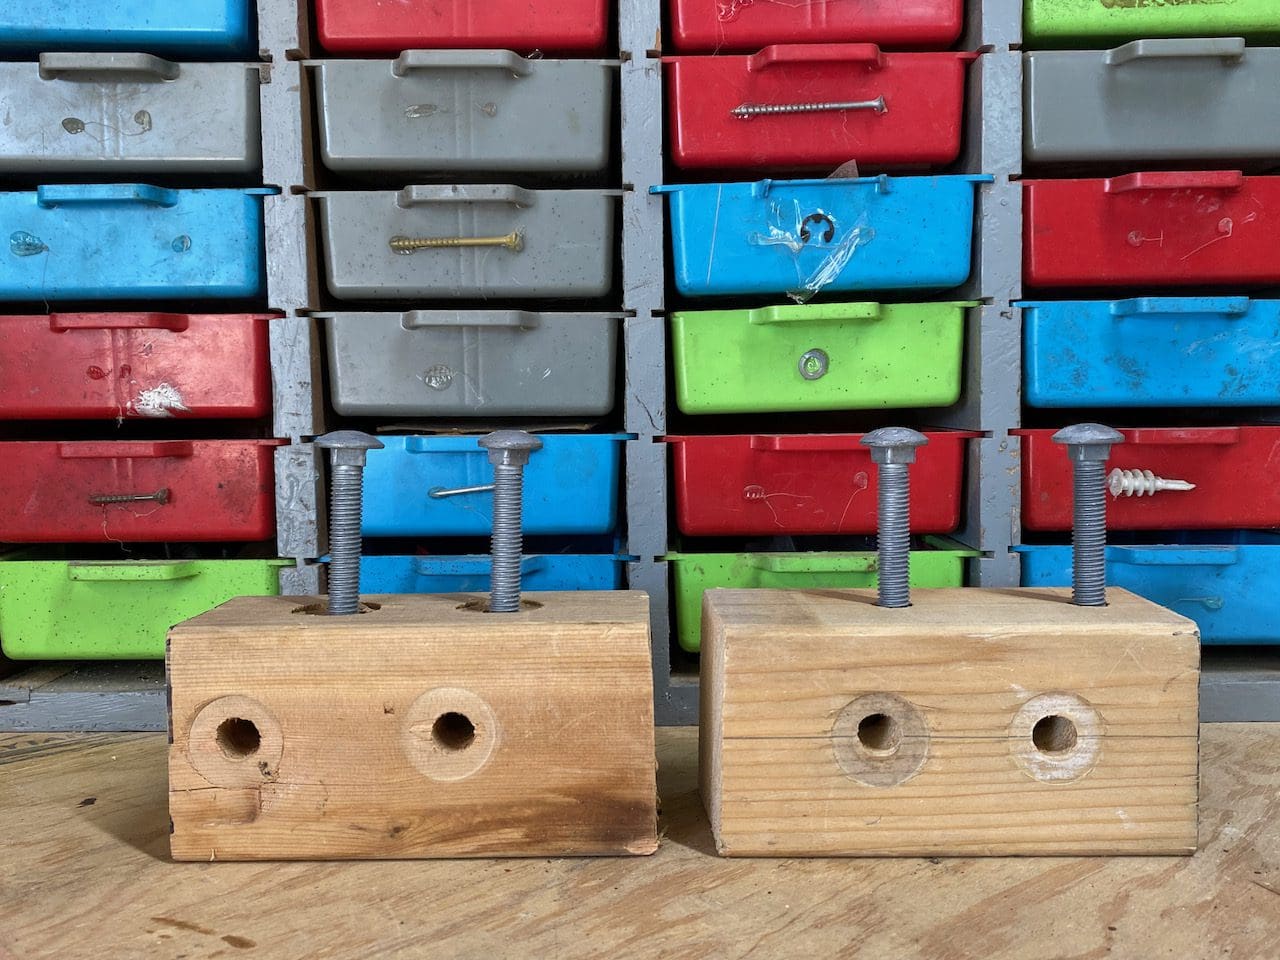 Two wooden blocks with bolts